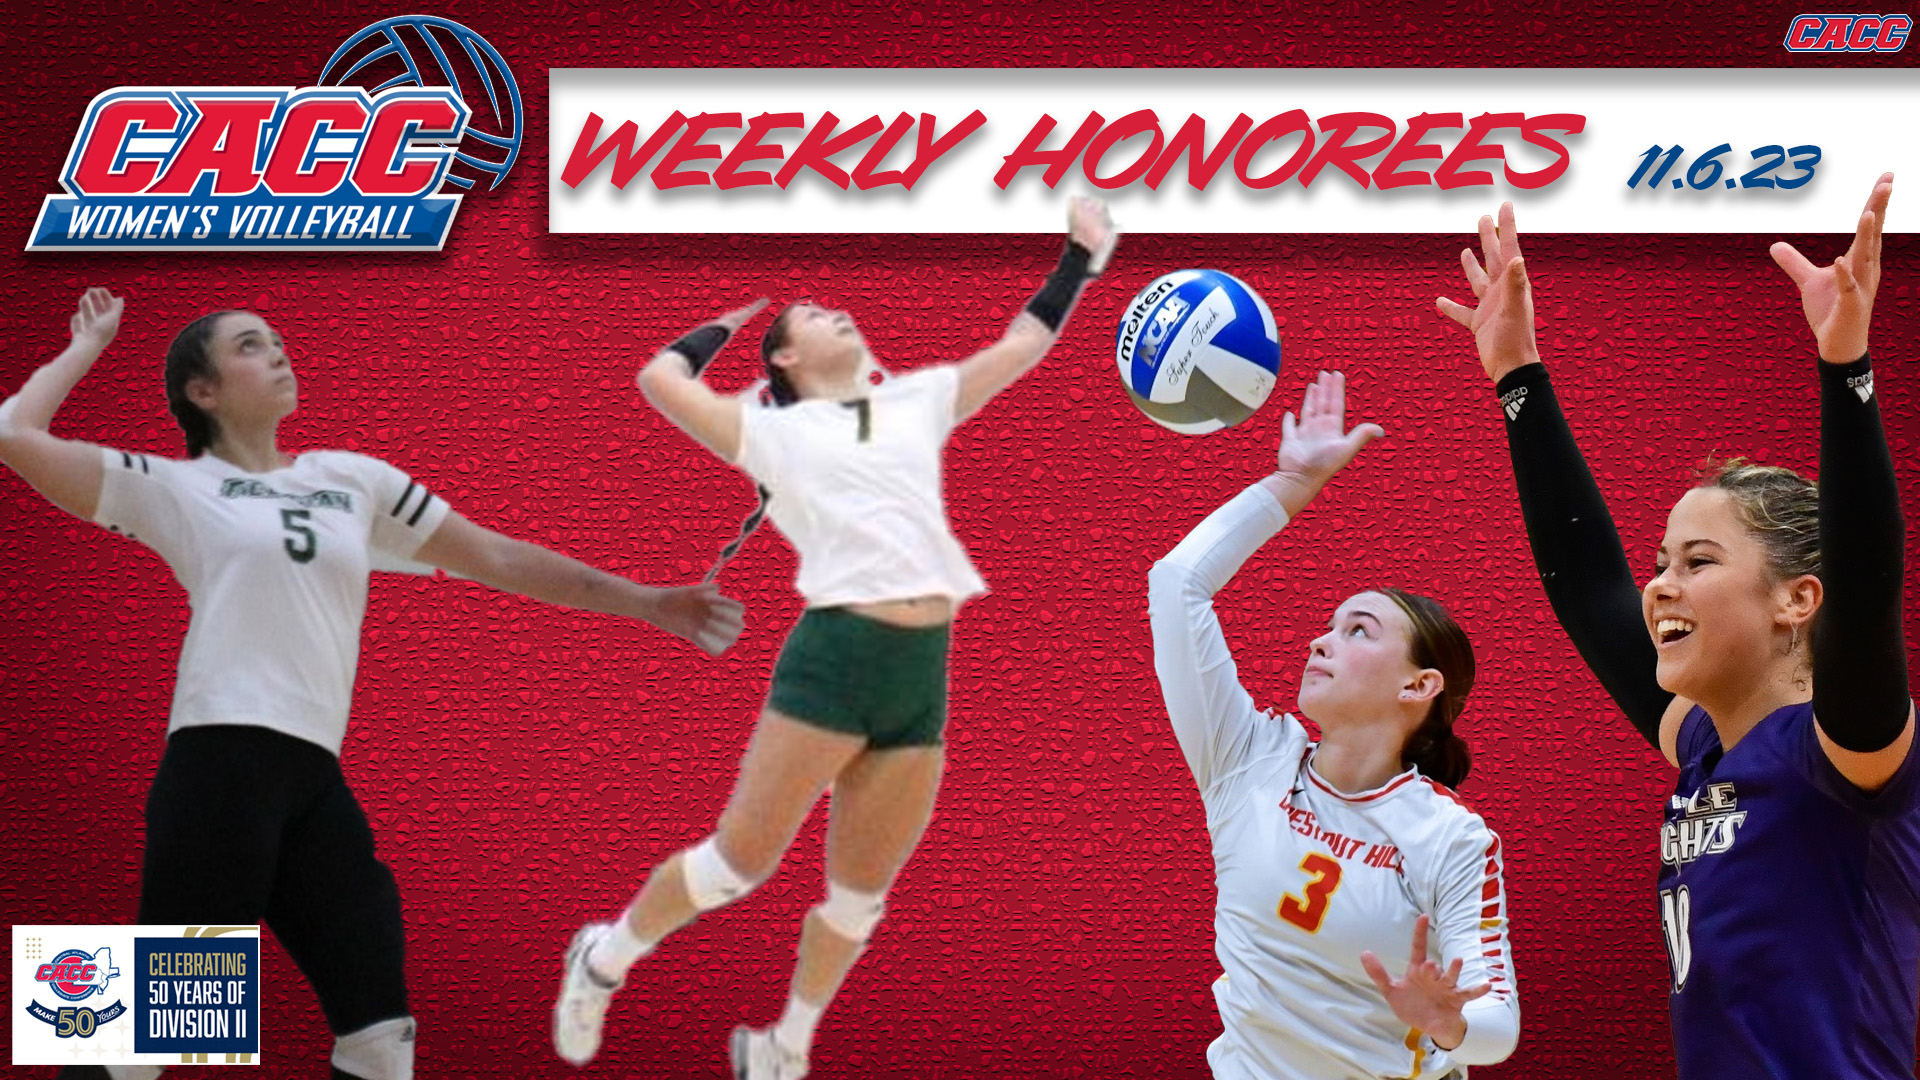 CACC Women's Volleyball Weekly Honorees (11-6-23)